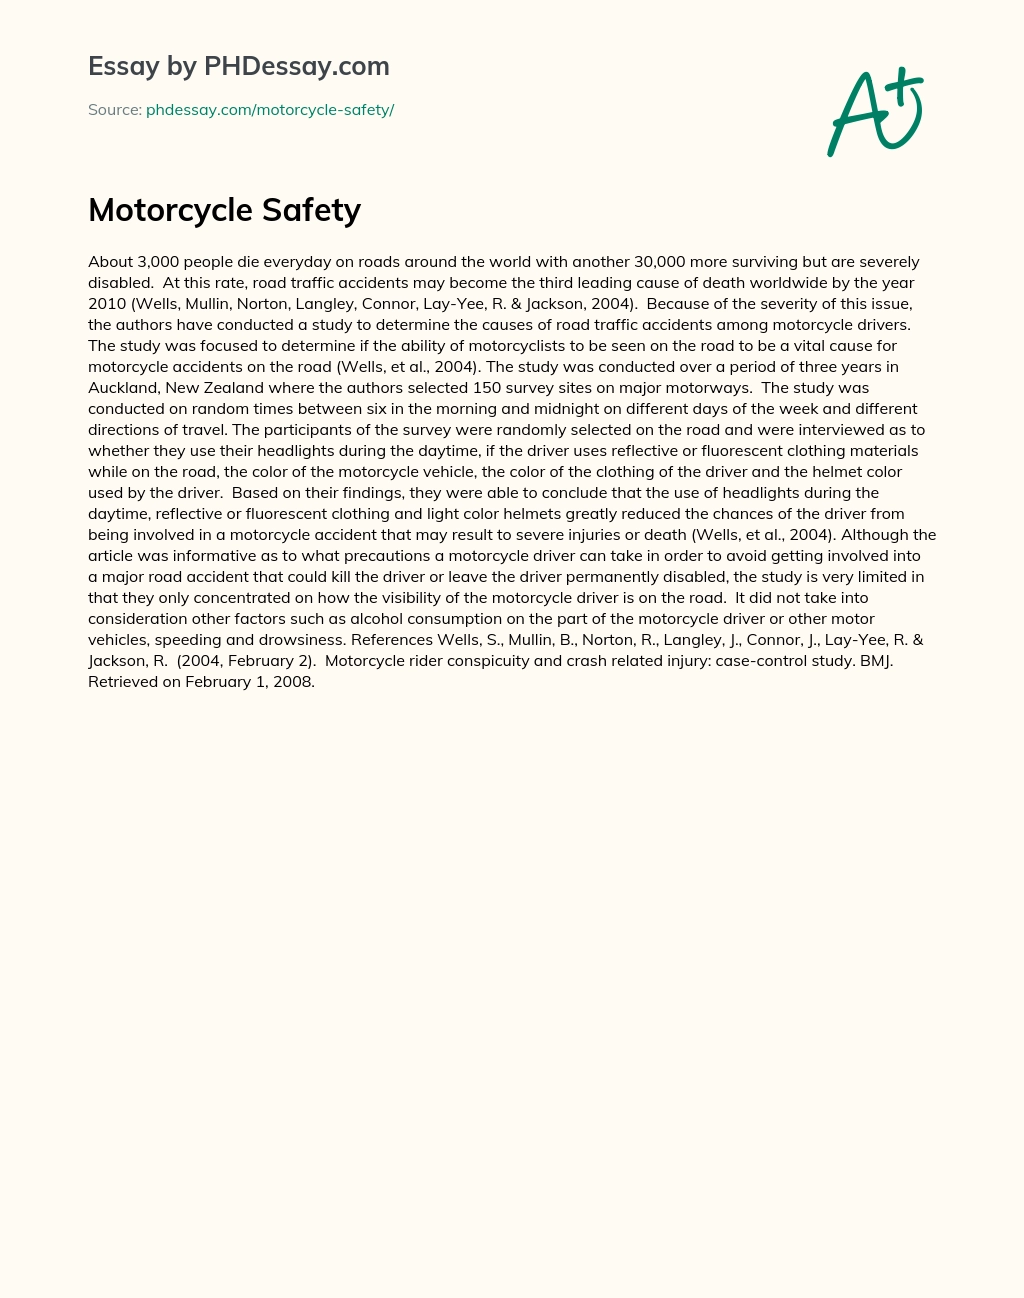 Motorcycle Safety essay